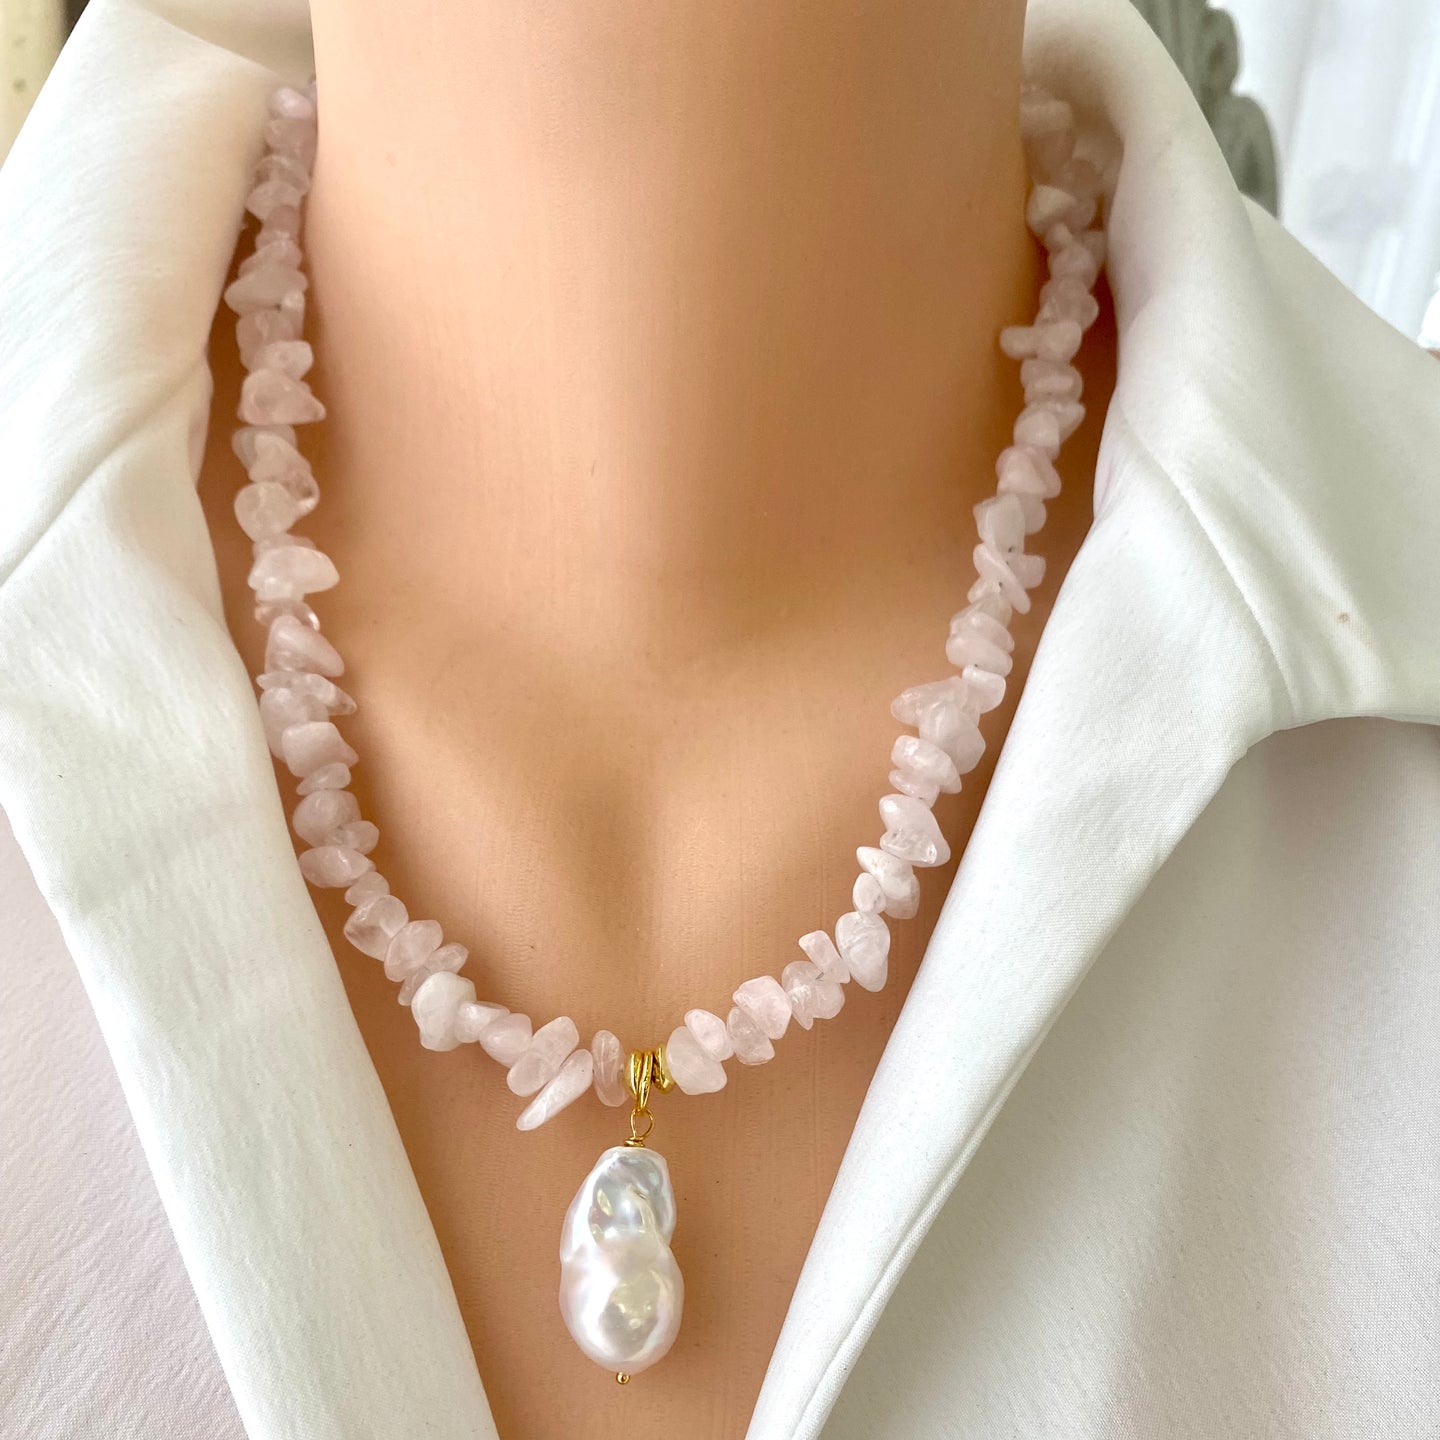 Rose Quartz Necklace & White Baroque Pearl Pendant, Soft Pink Necklace, January Birthstone, 19.5